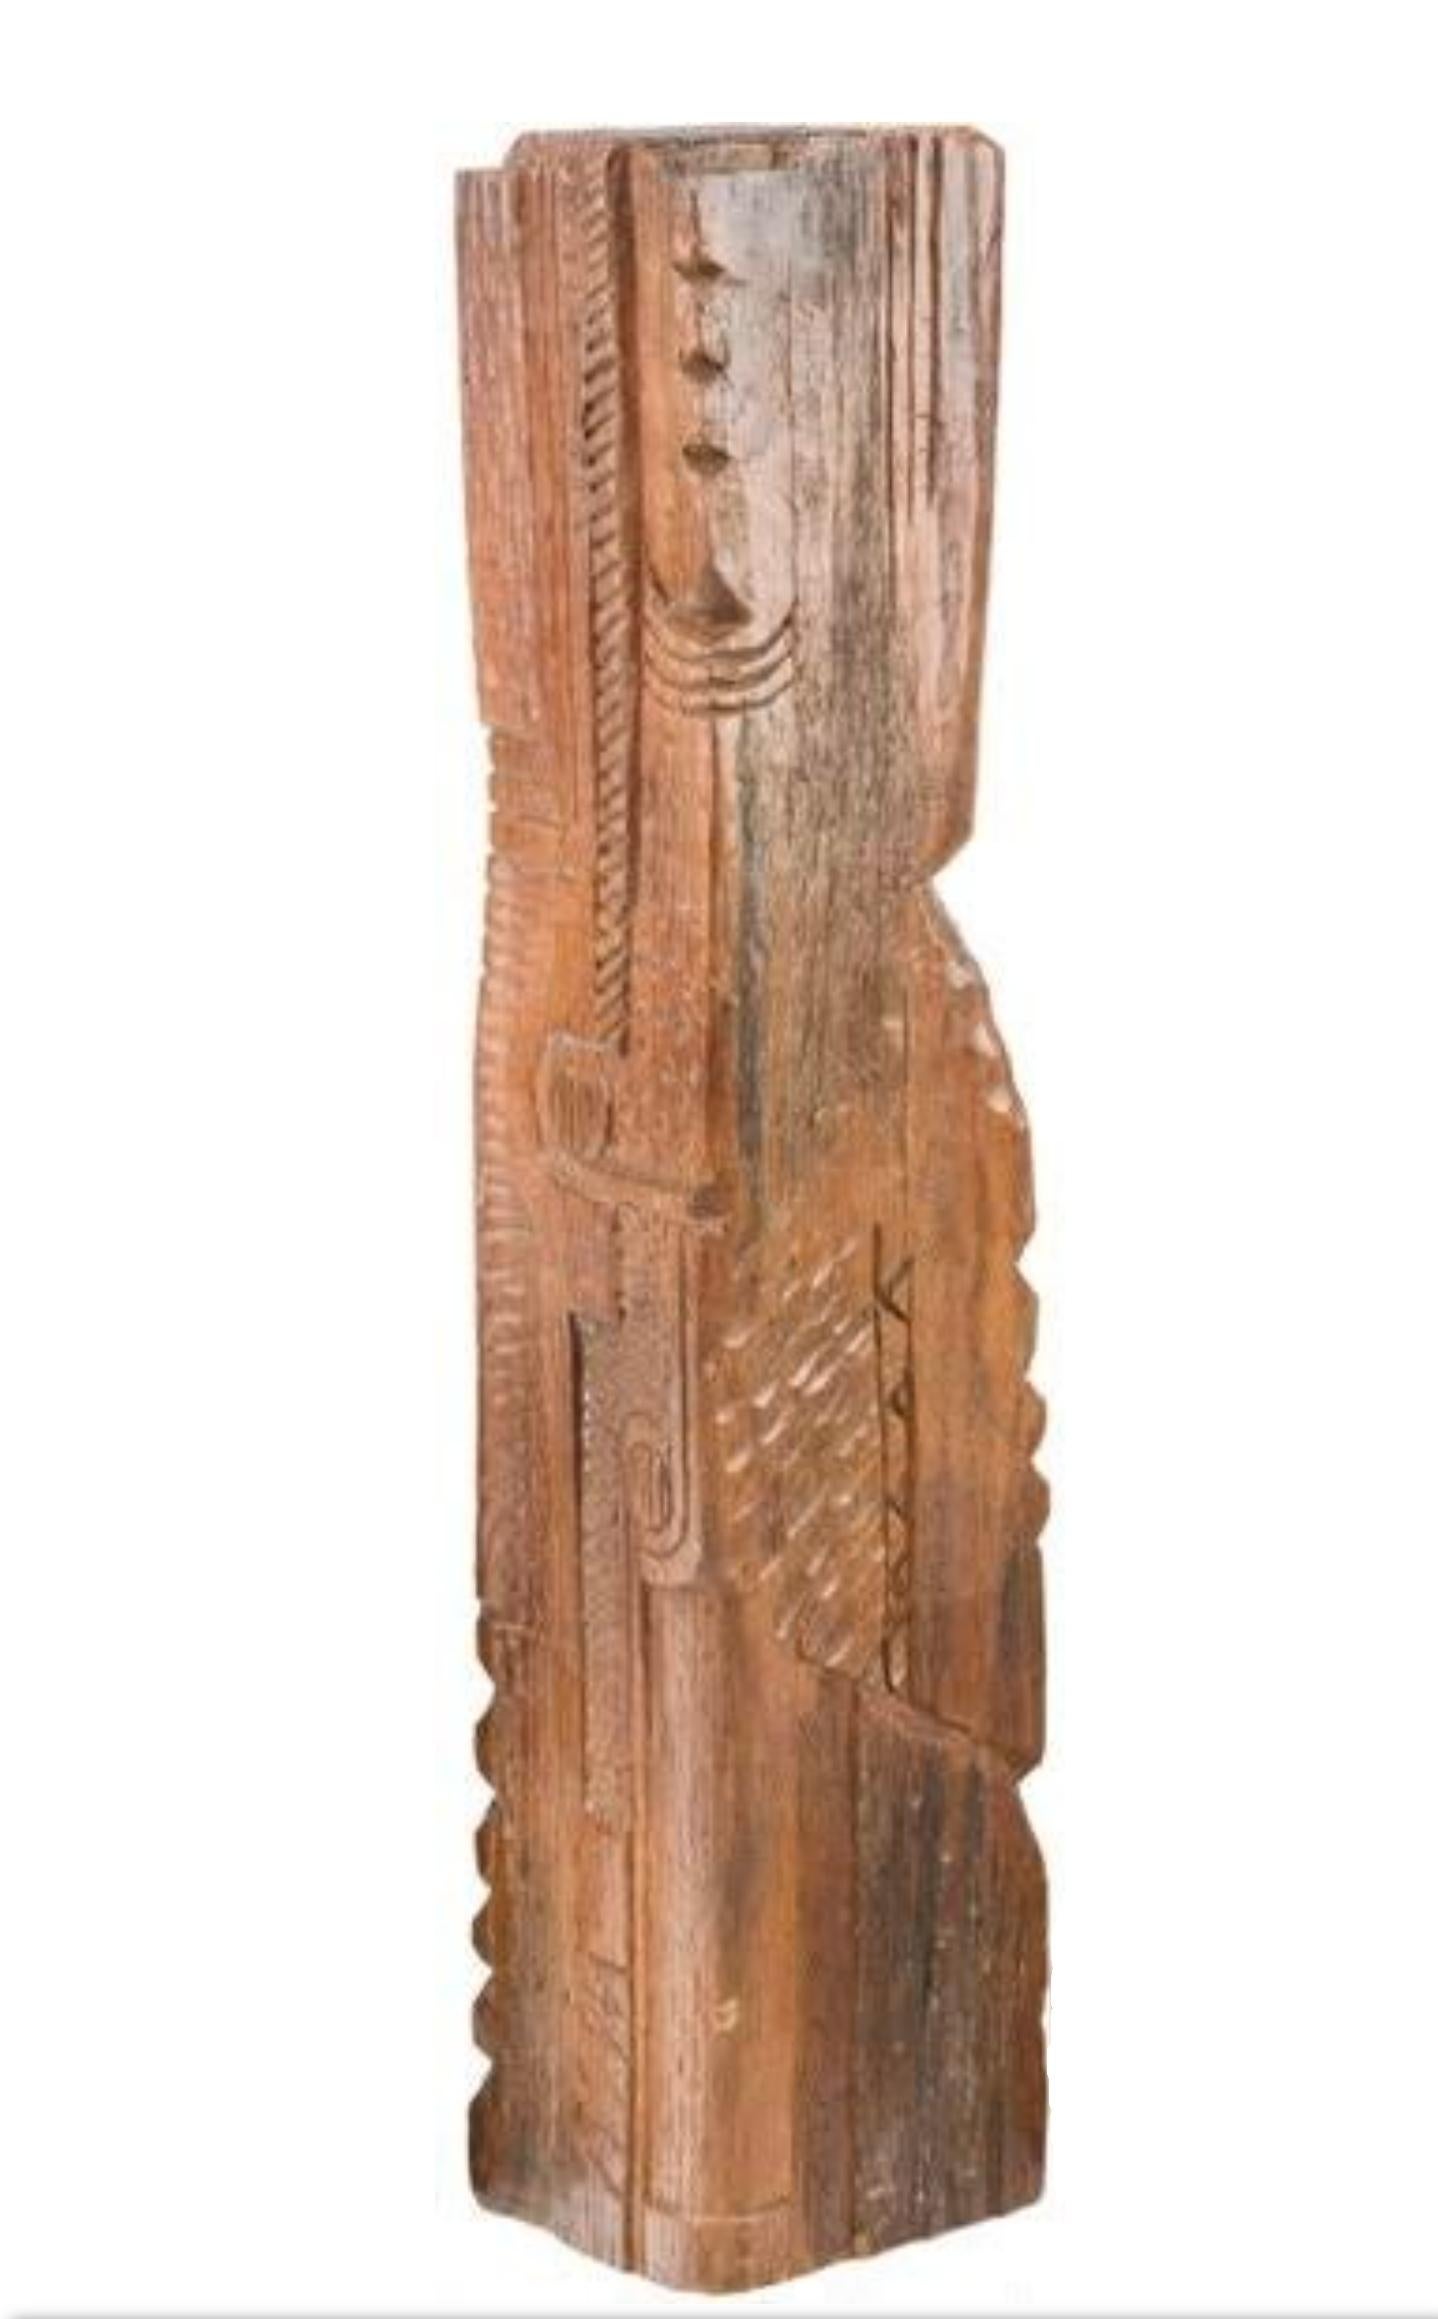 José De Creeft (1884-1982) Female Totem wood carving sculpture 

Provenance / Acquisition:
Property from the important collection of the late Robert Gingold (1944-2017)

Highly reputable auction house Heritage Auctions, Dallas, Texas had the